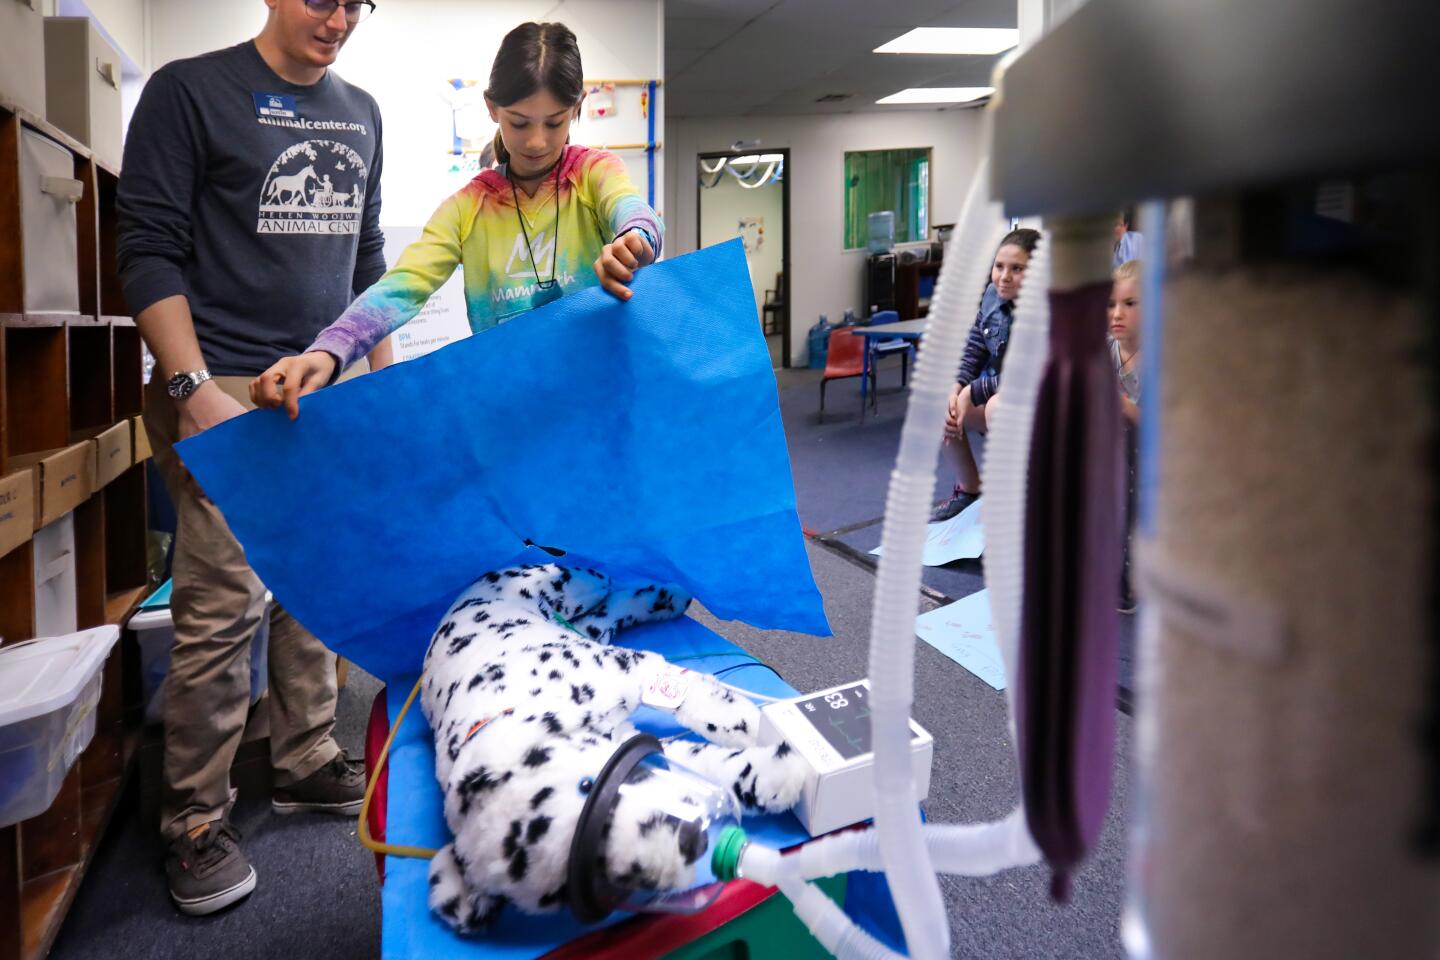 With Justin Norris, education coordinator at the Helen Woodward Animal Center guiding her, Liana Ring, 10, learns how animals are prepared for surgery using "Spot," a stuffed Dalmatian toy dog, during the one-day veterinarian camp, February 8, in Rancho Santa Fe.